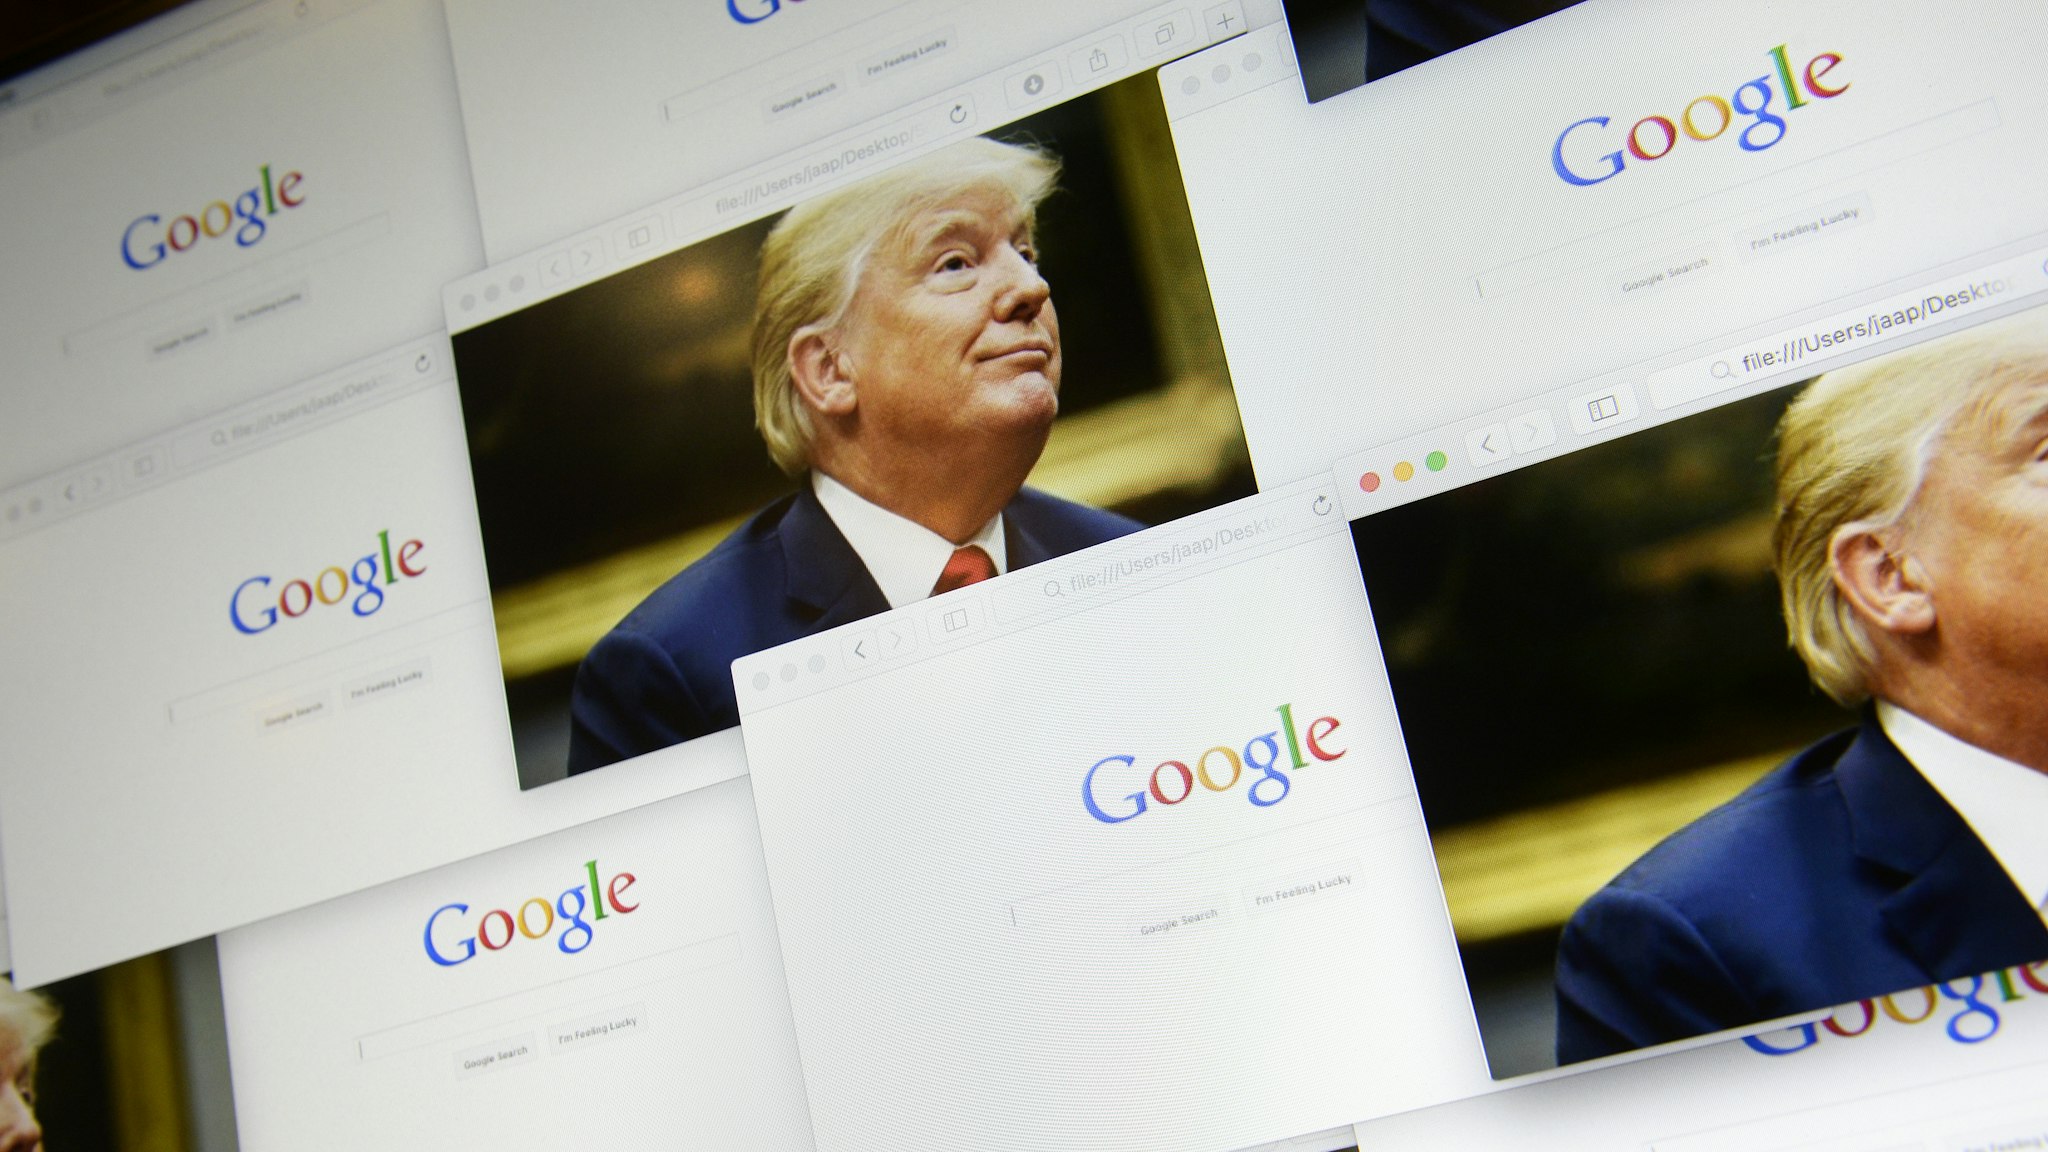 Google logos are seen in this photo illustration together with images of Donald Trump on September 5, 2018.